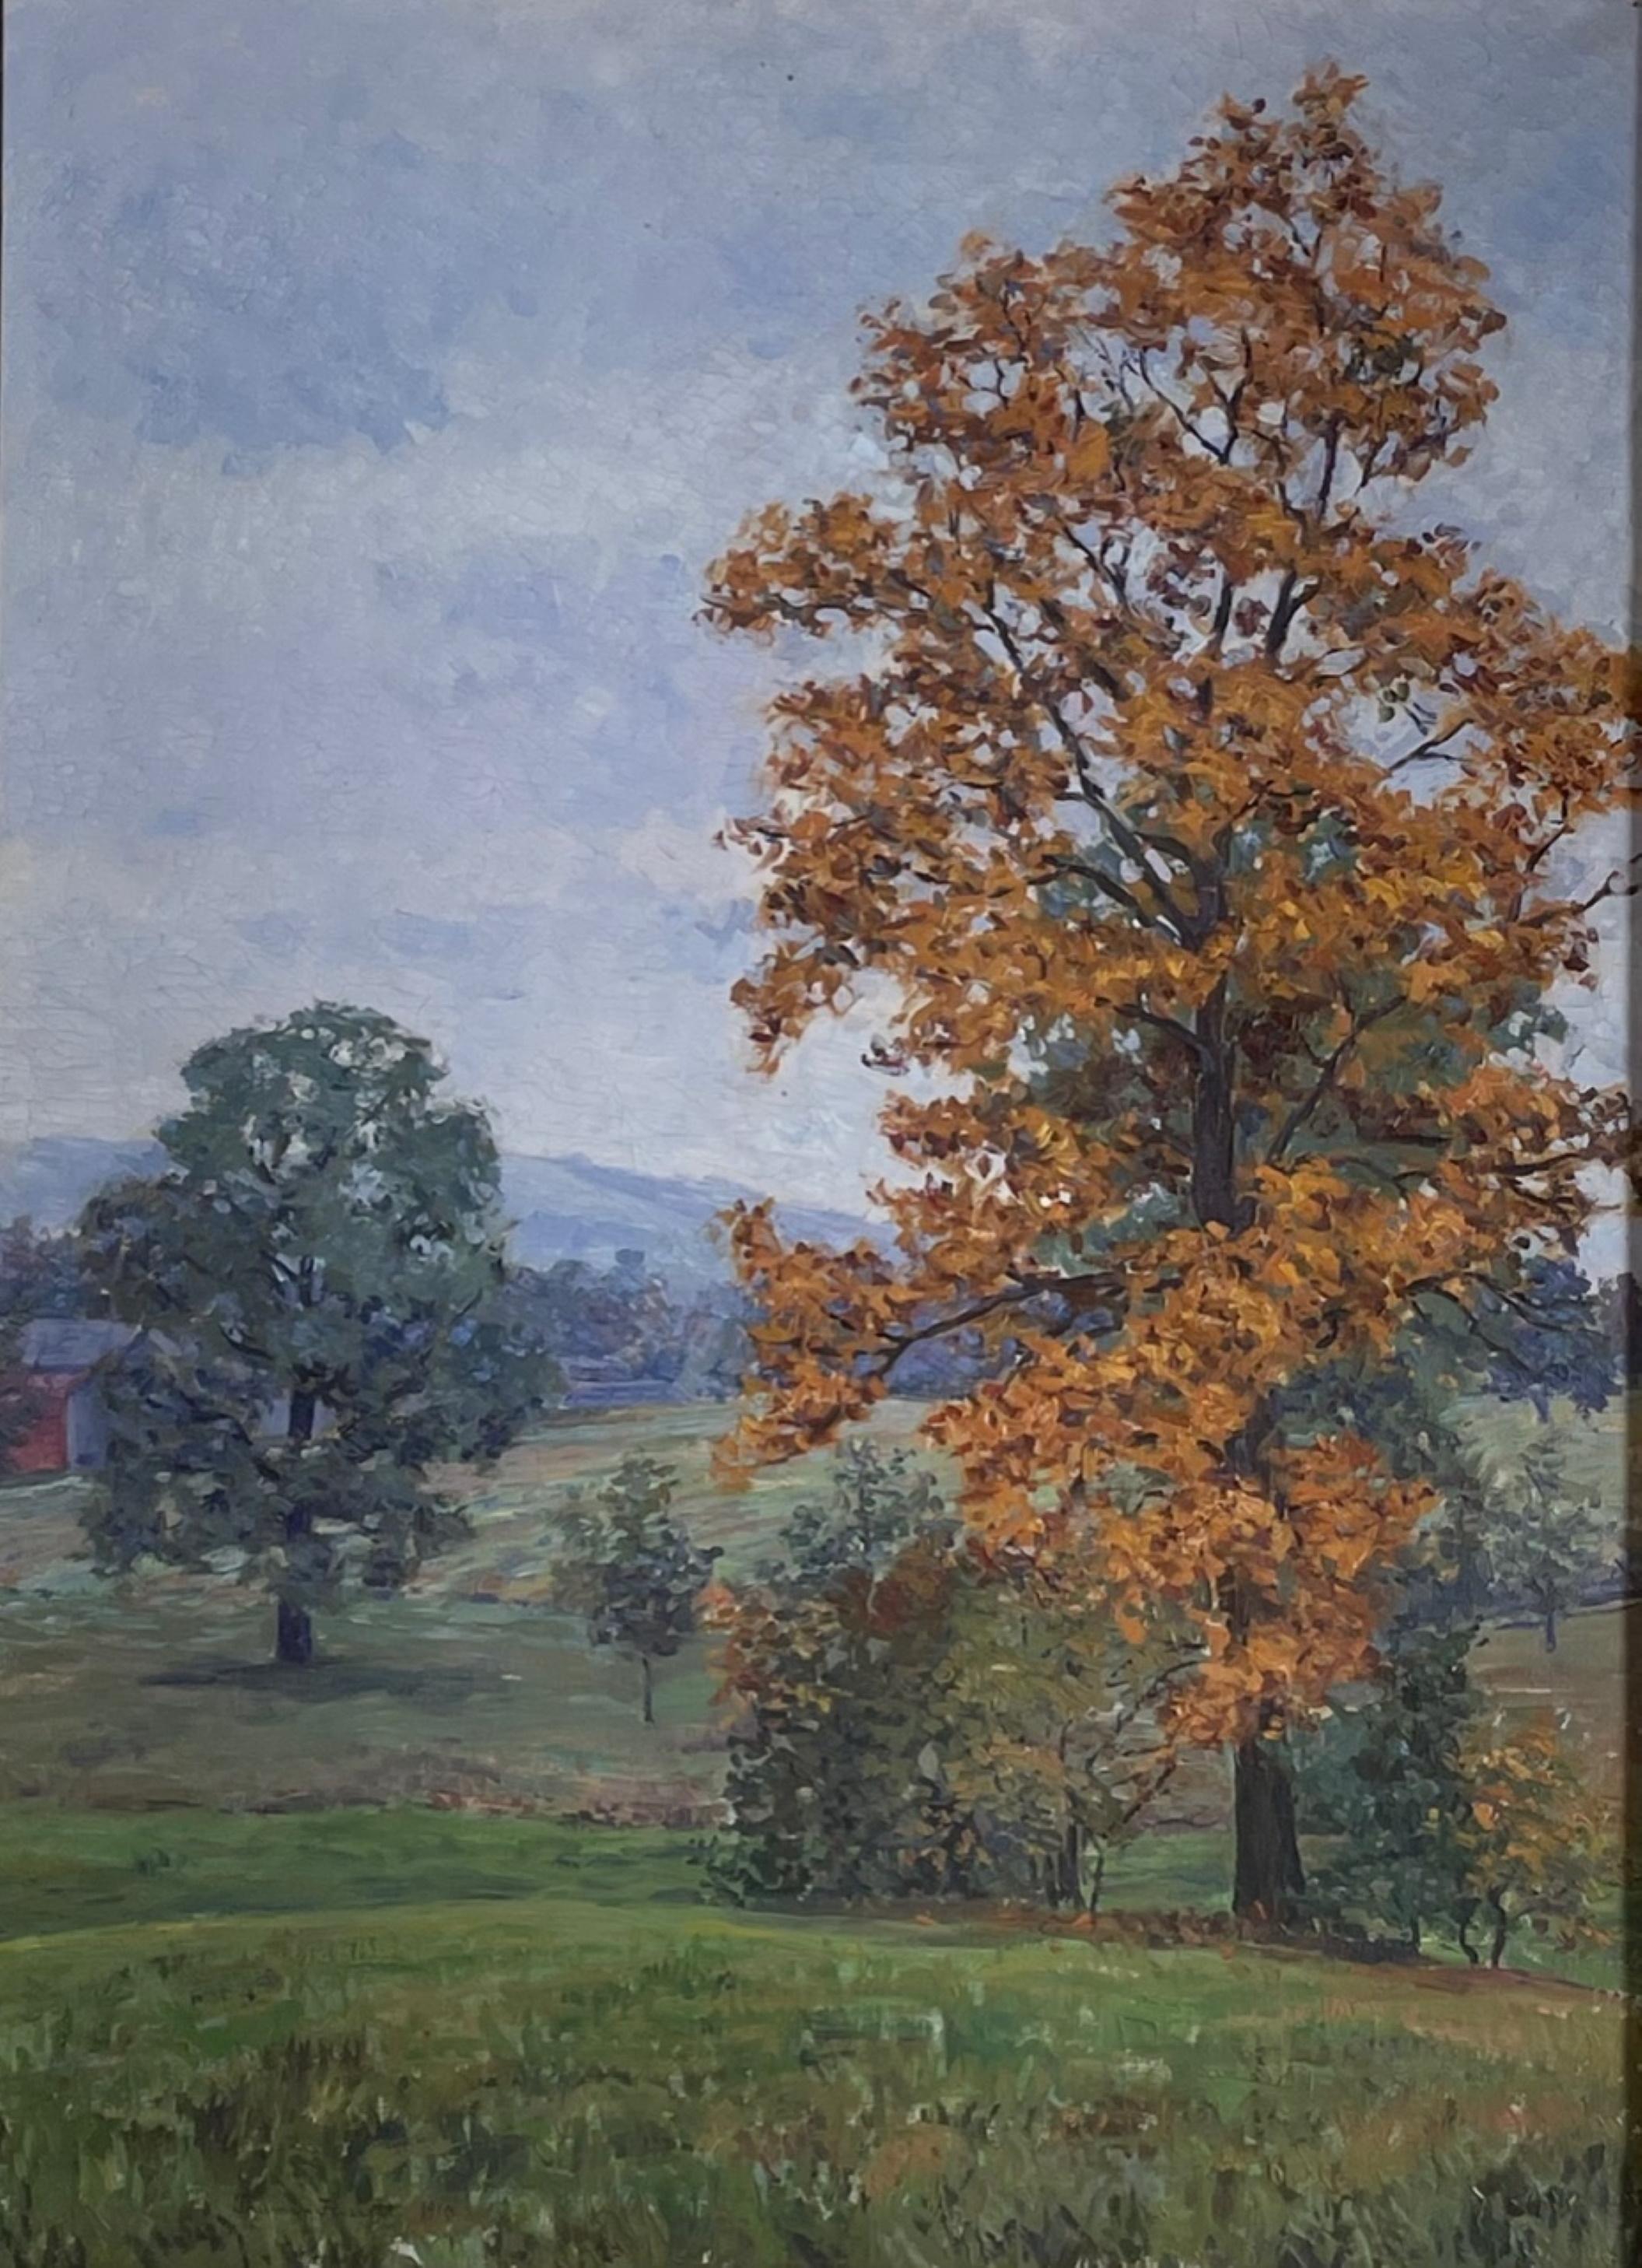 Vintage Hudson Valley New York Oil Painting in Newcomb Macklin Frame

Romantic and moody autumn landscape painting, oil on canvas signed by Truman Edmund Fassett and dated 1910. Fassett, a New York artist, graduated from Cornell University in